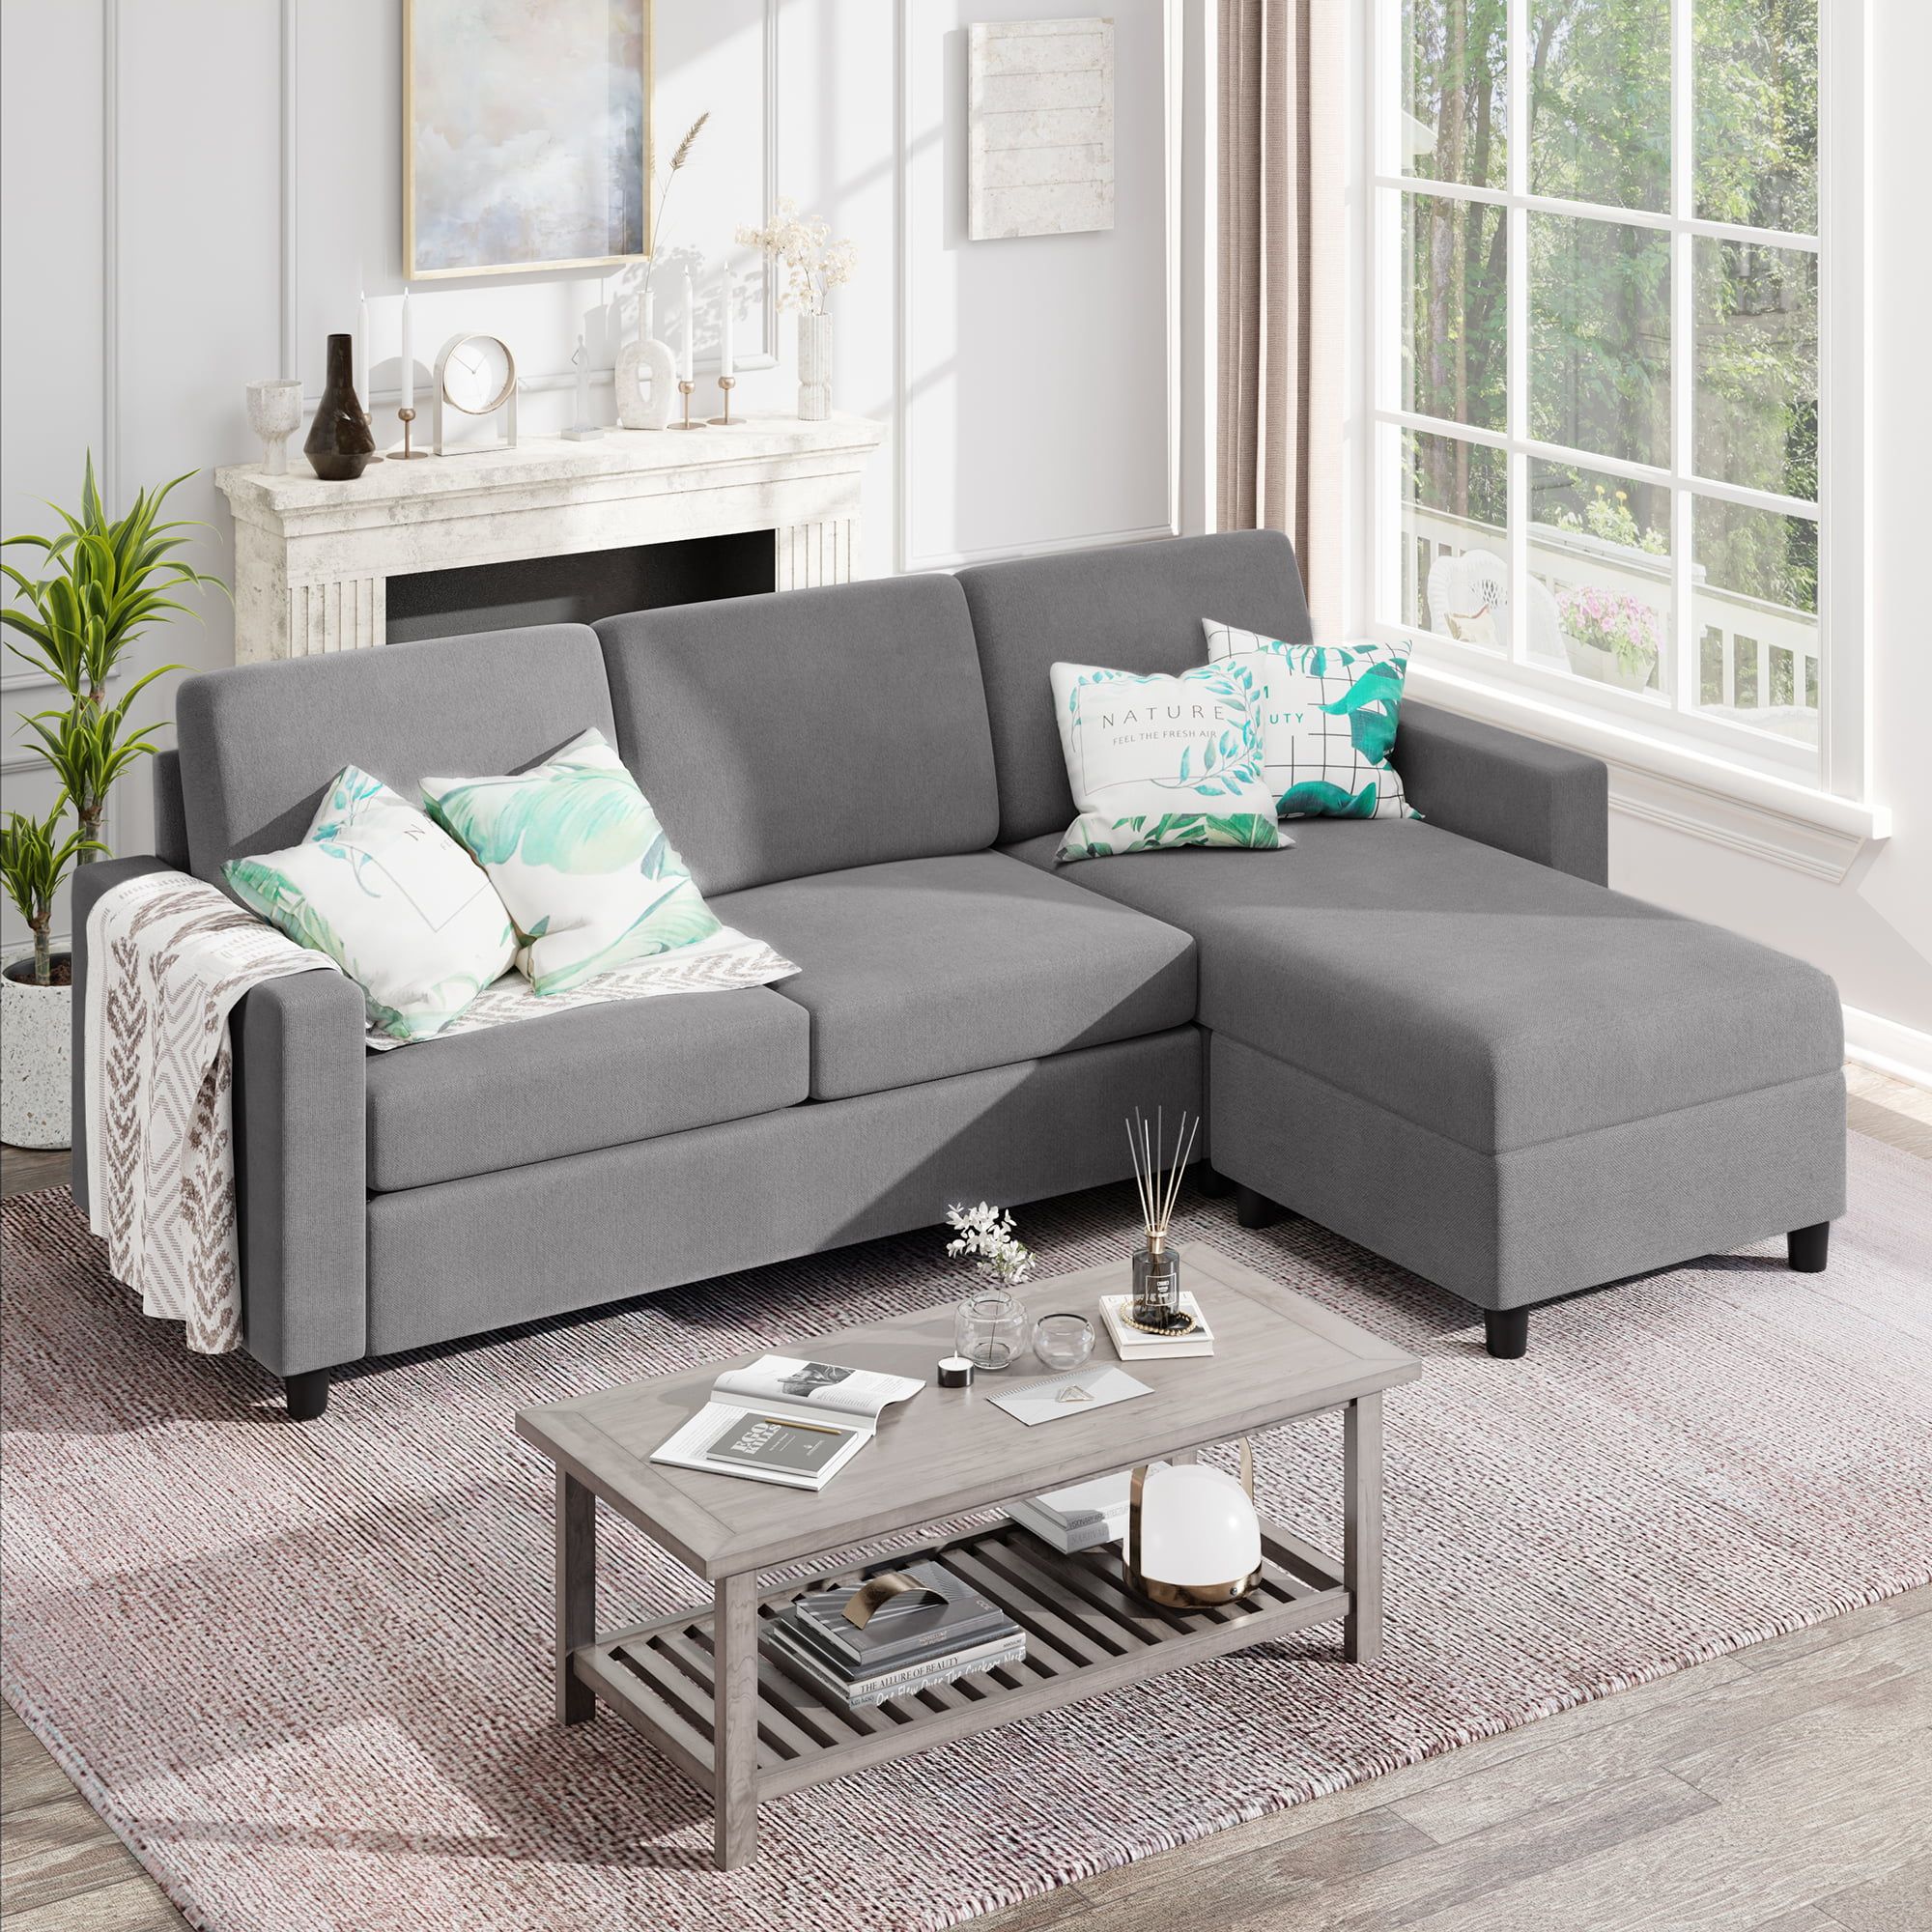 Sobaniilo Convertible Sectional Sofa Couch, Modern Linen Fabric L Shaped  3 Seat Sofa Sectional With Reversible Chaise For Small Space (dark Gray) –  Walmart With Reversible Sectional Sofas (Gallery 10 of 20)